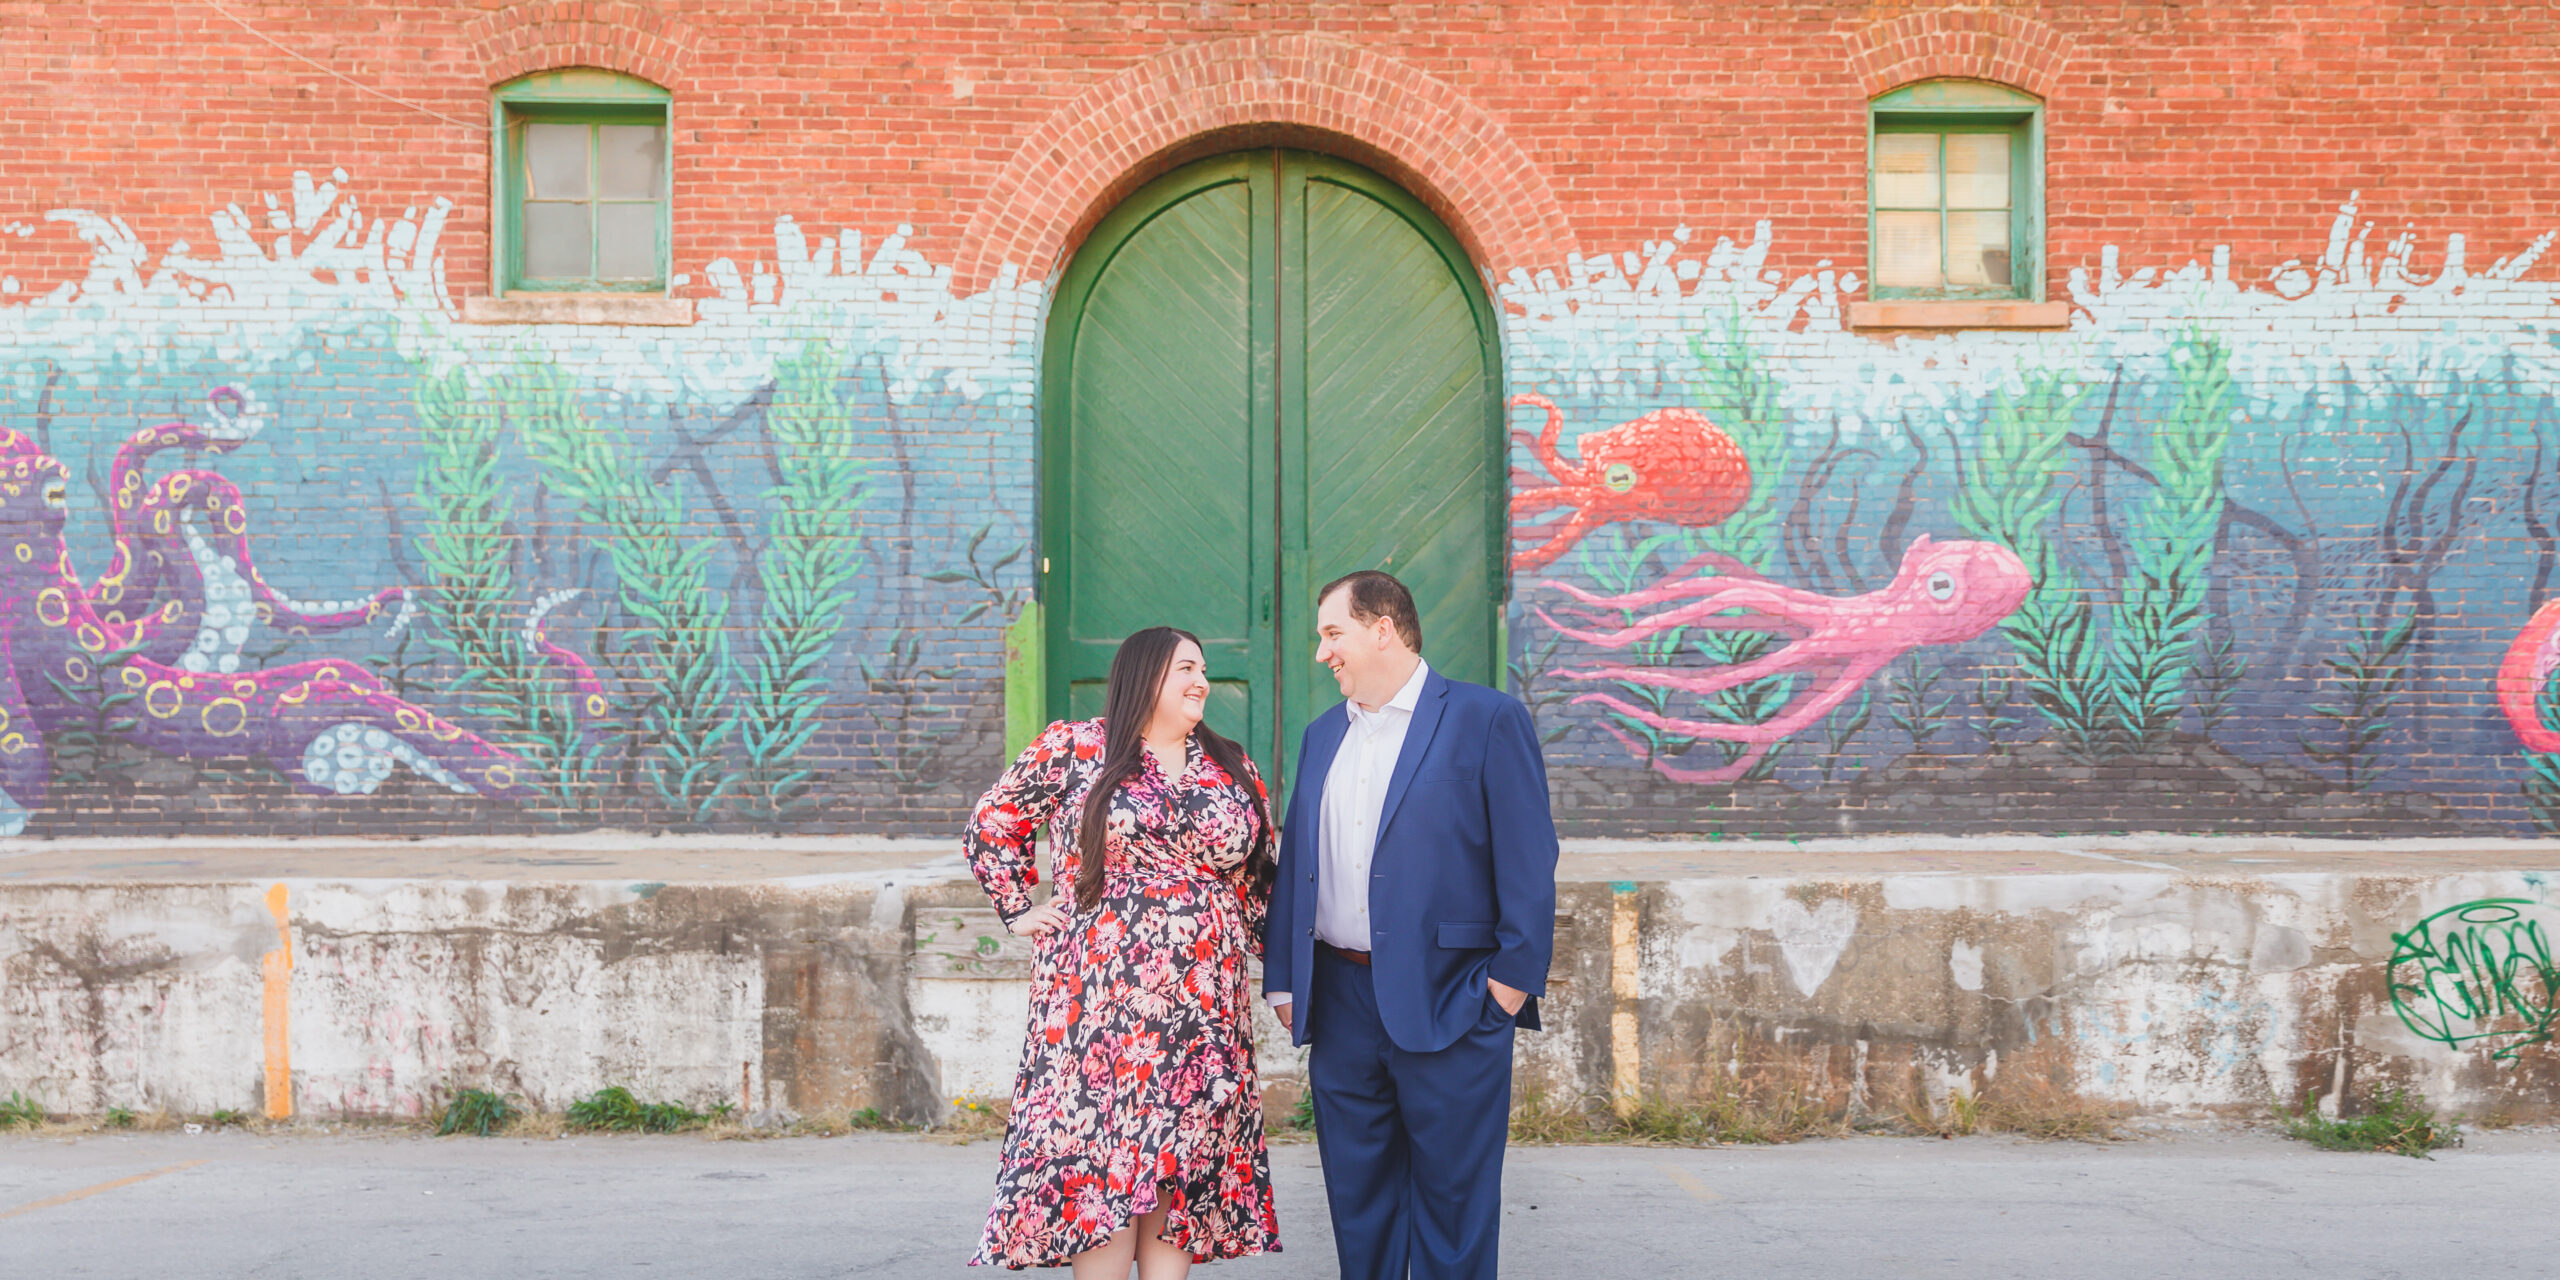 Engagement photography in the West Bottoms by Kansas City wedding photographers Wisdom-Watson Weddings.